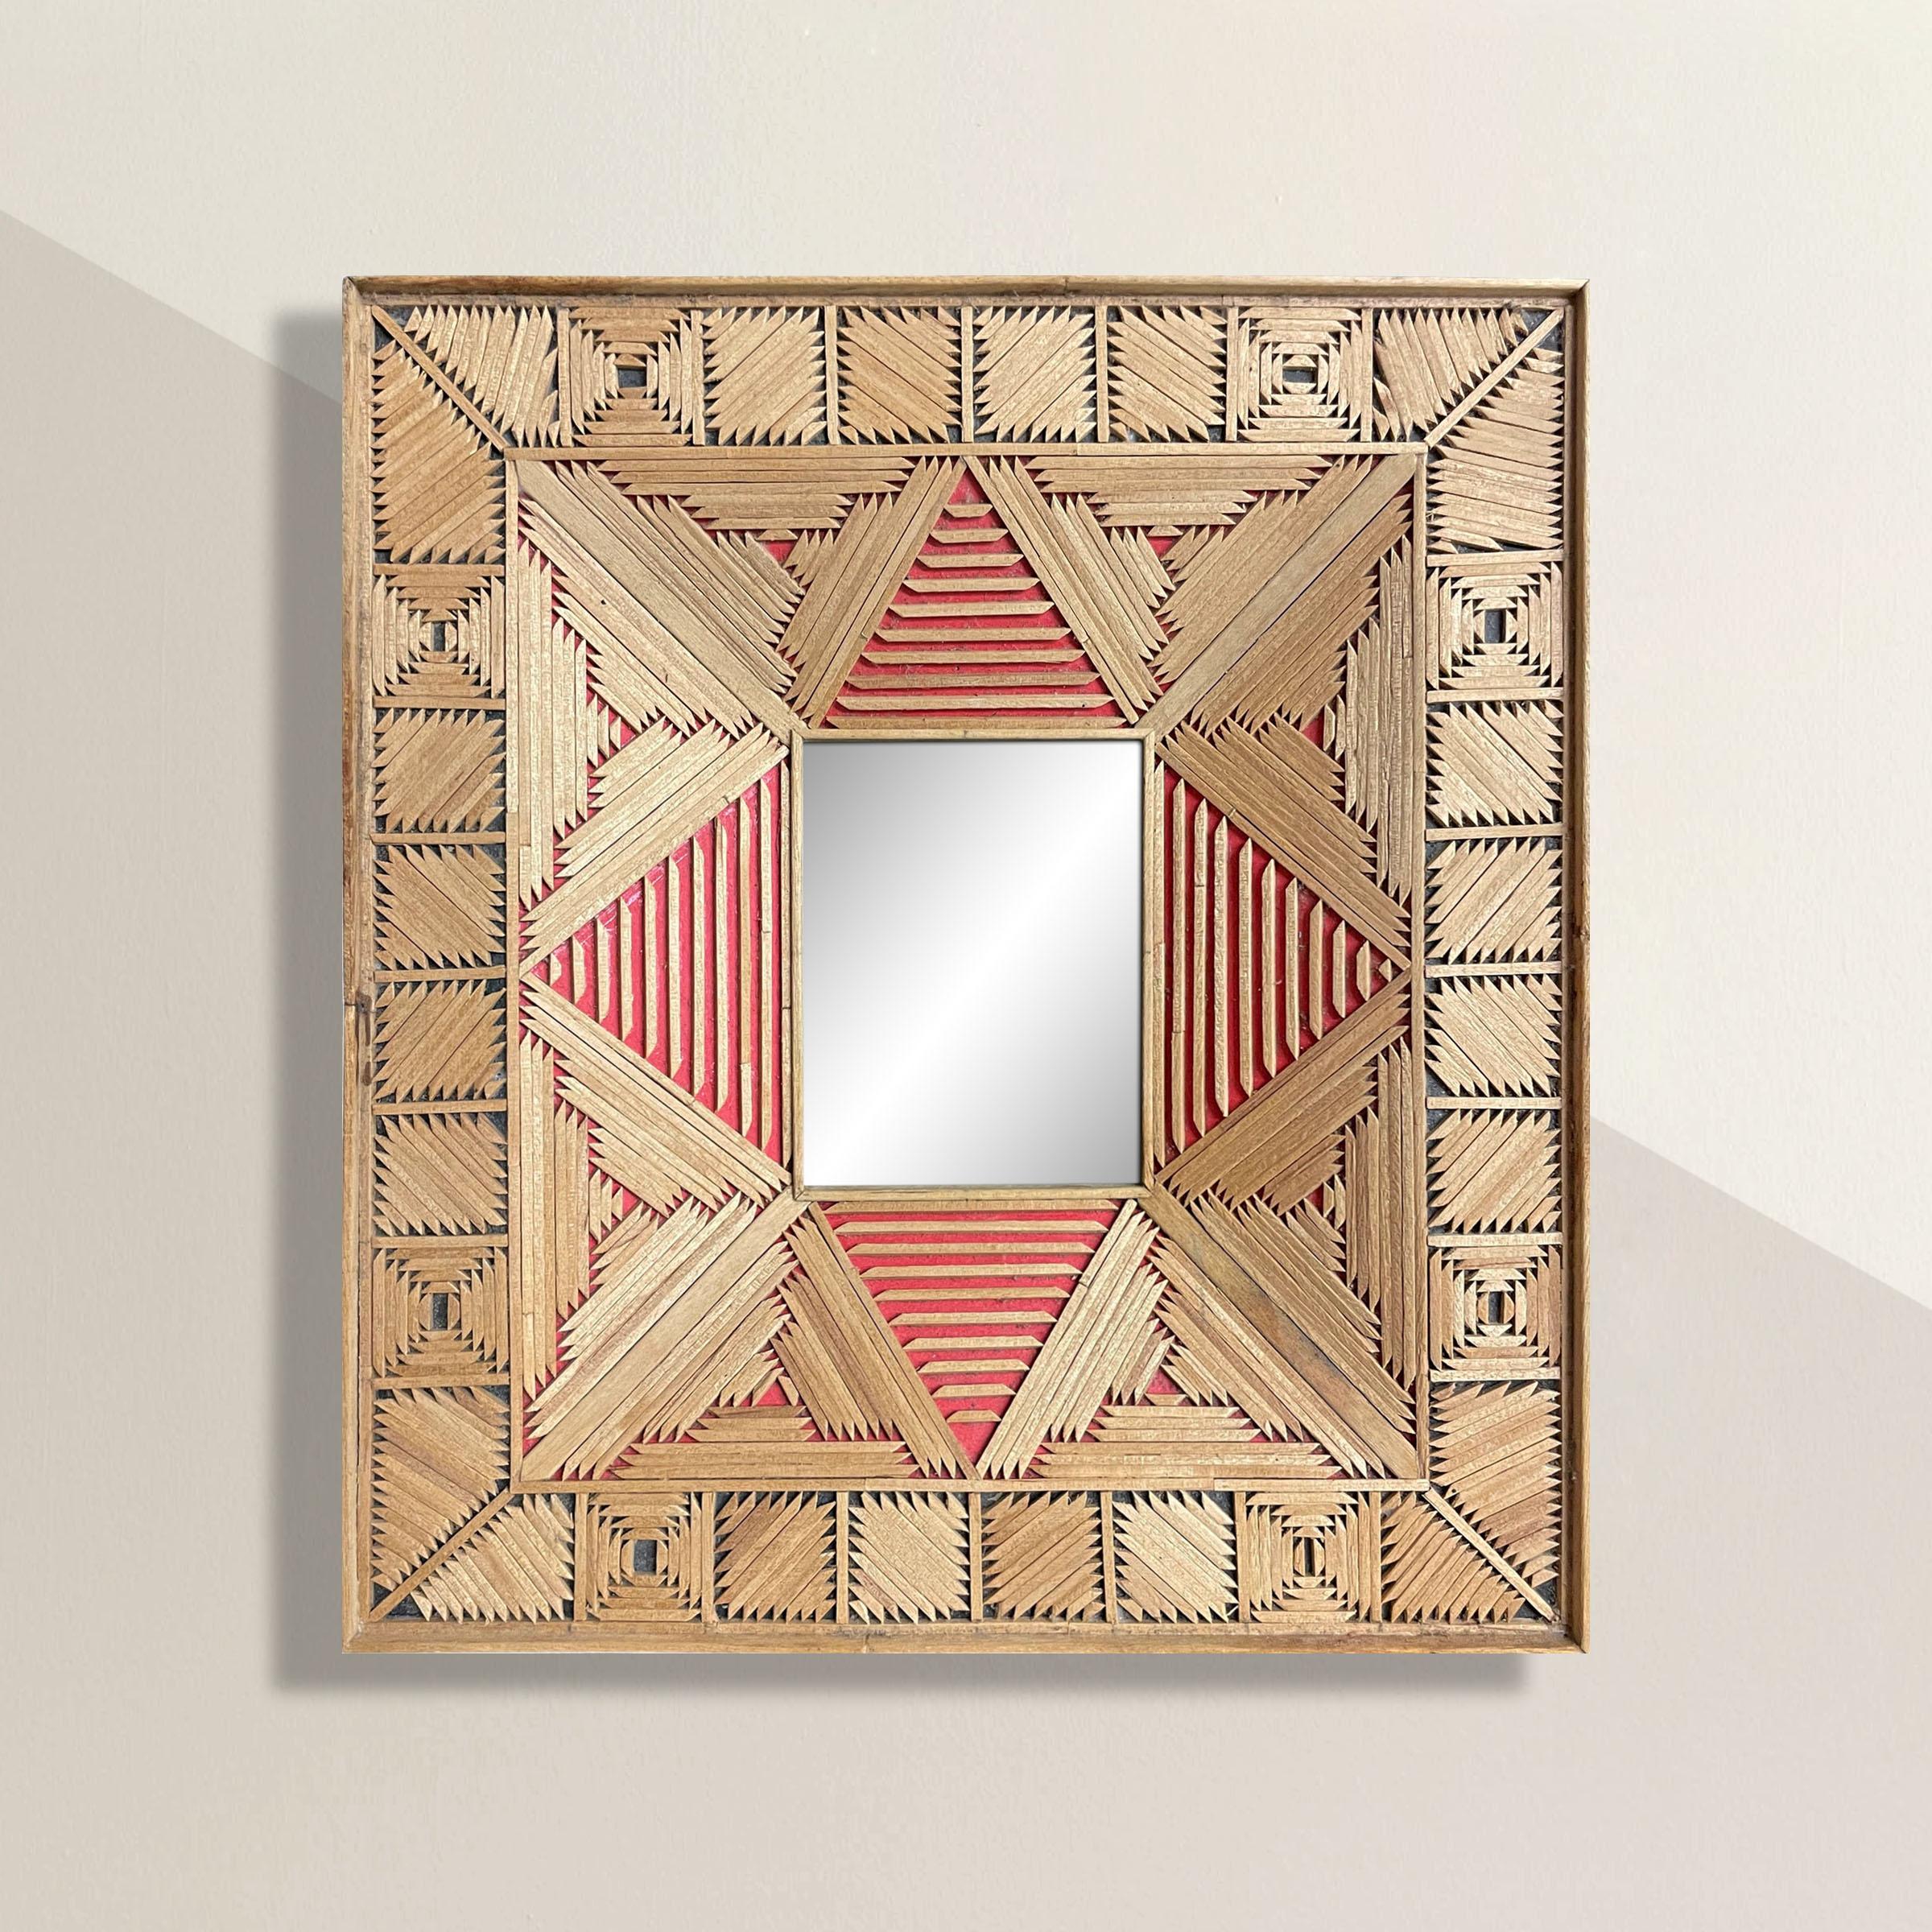 The most charming 20th century American Folk Art mirror with a frame made from thousands of toothpicks, arranged into geometric patterns, and backed with rd and black papers.